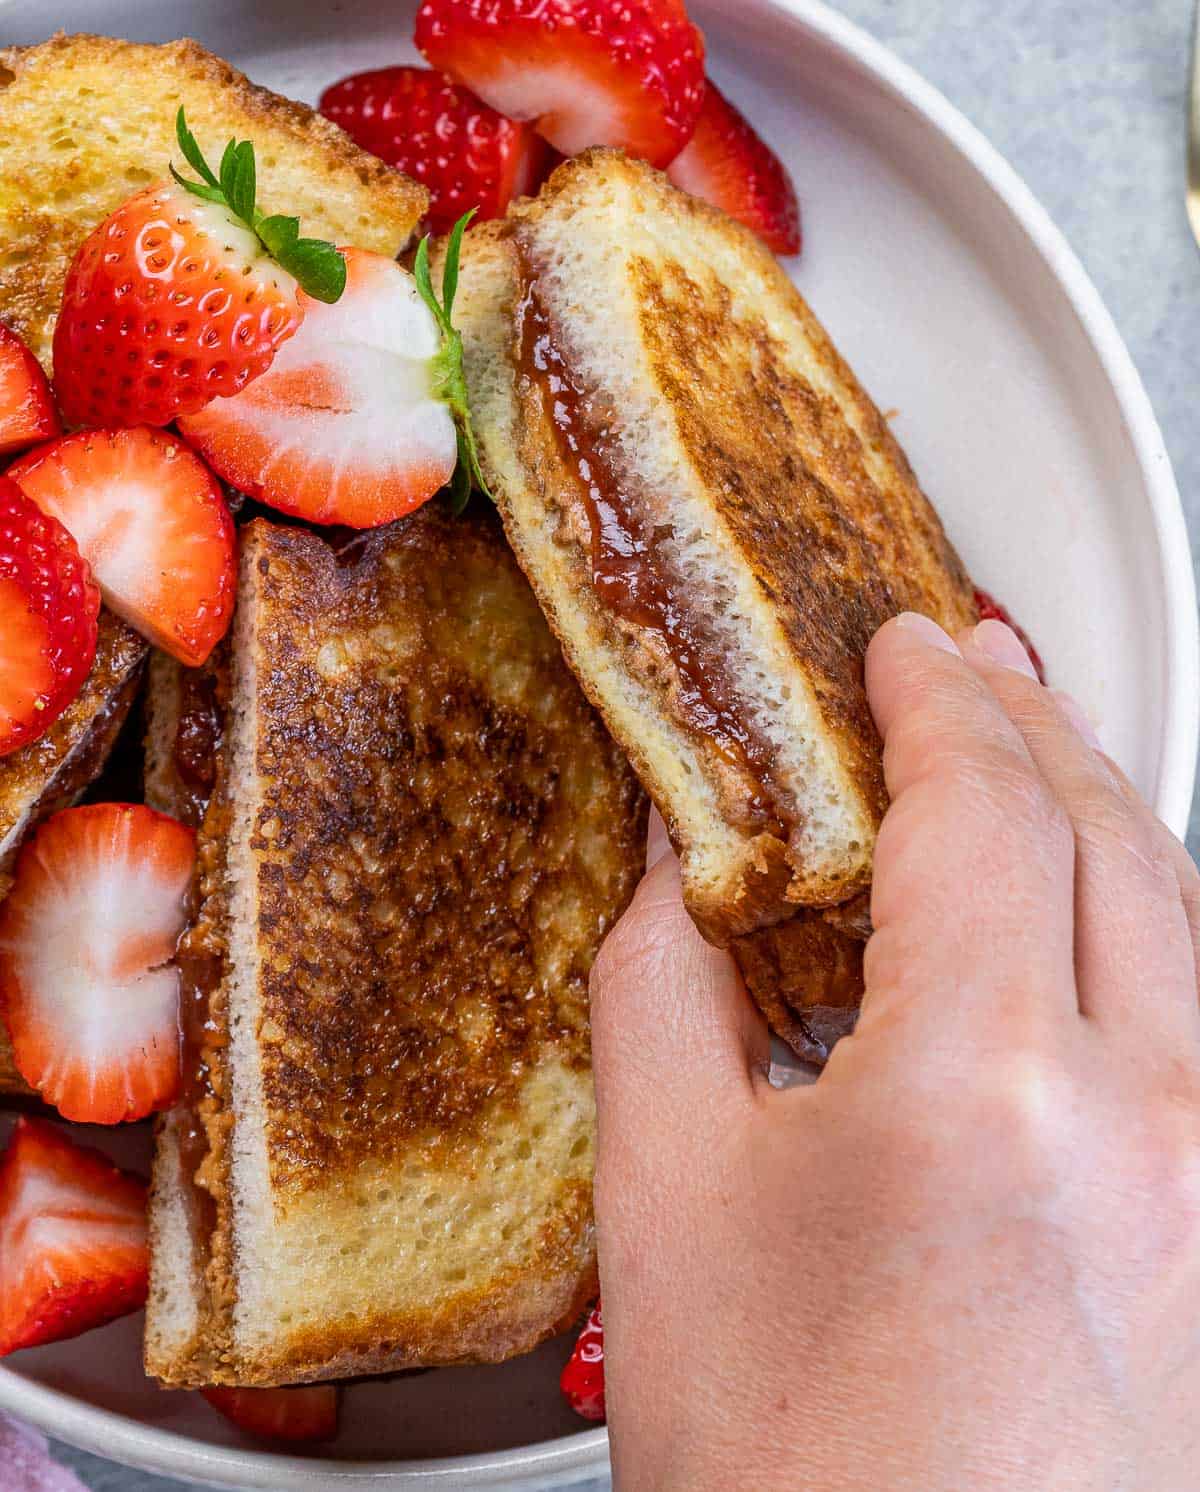 Hand picking up a peanut butter jelly French toast near sliced strawberries.